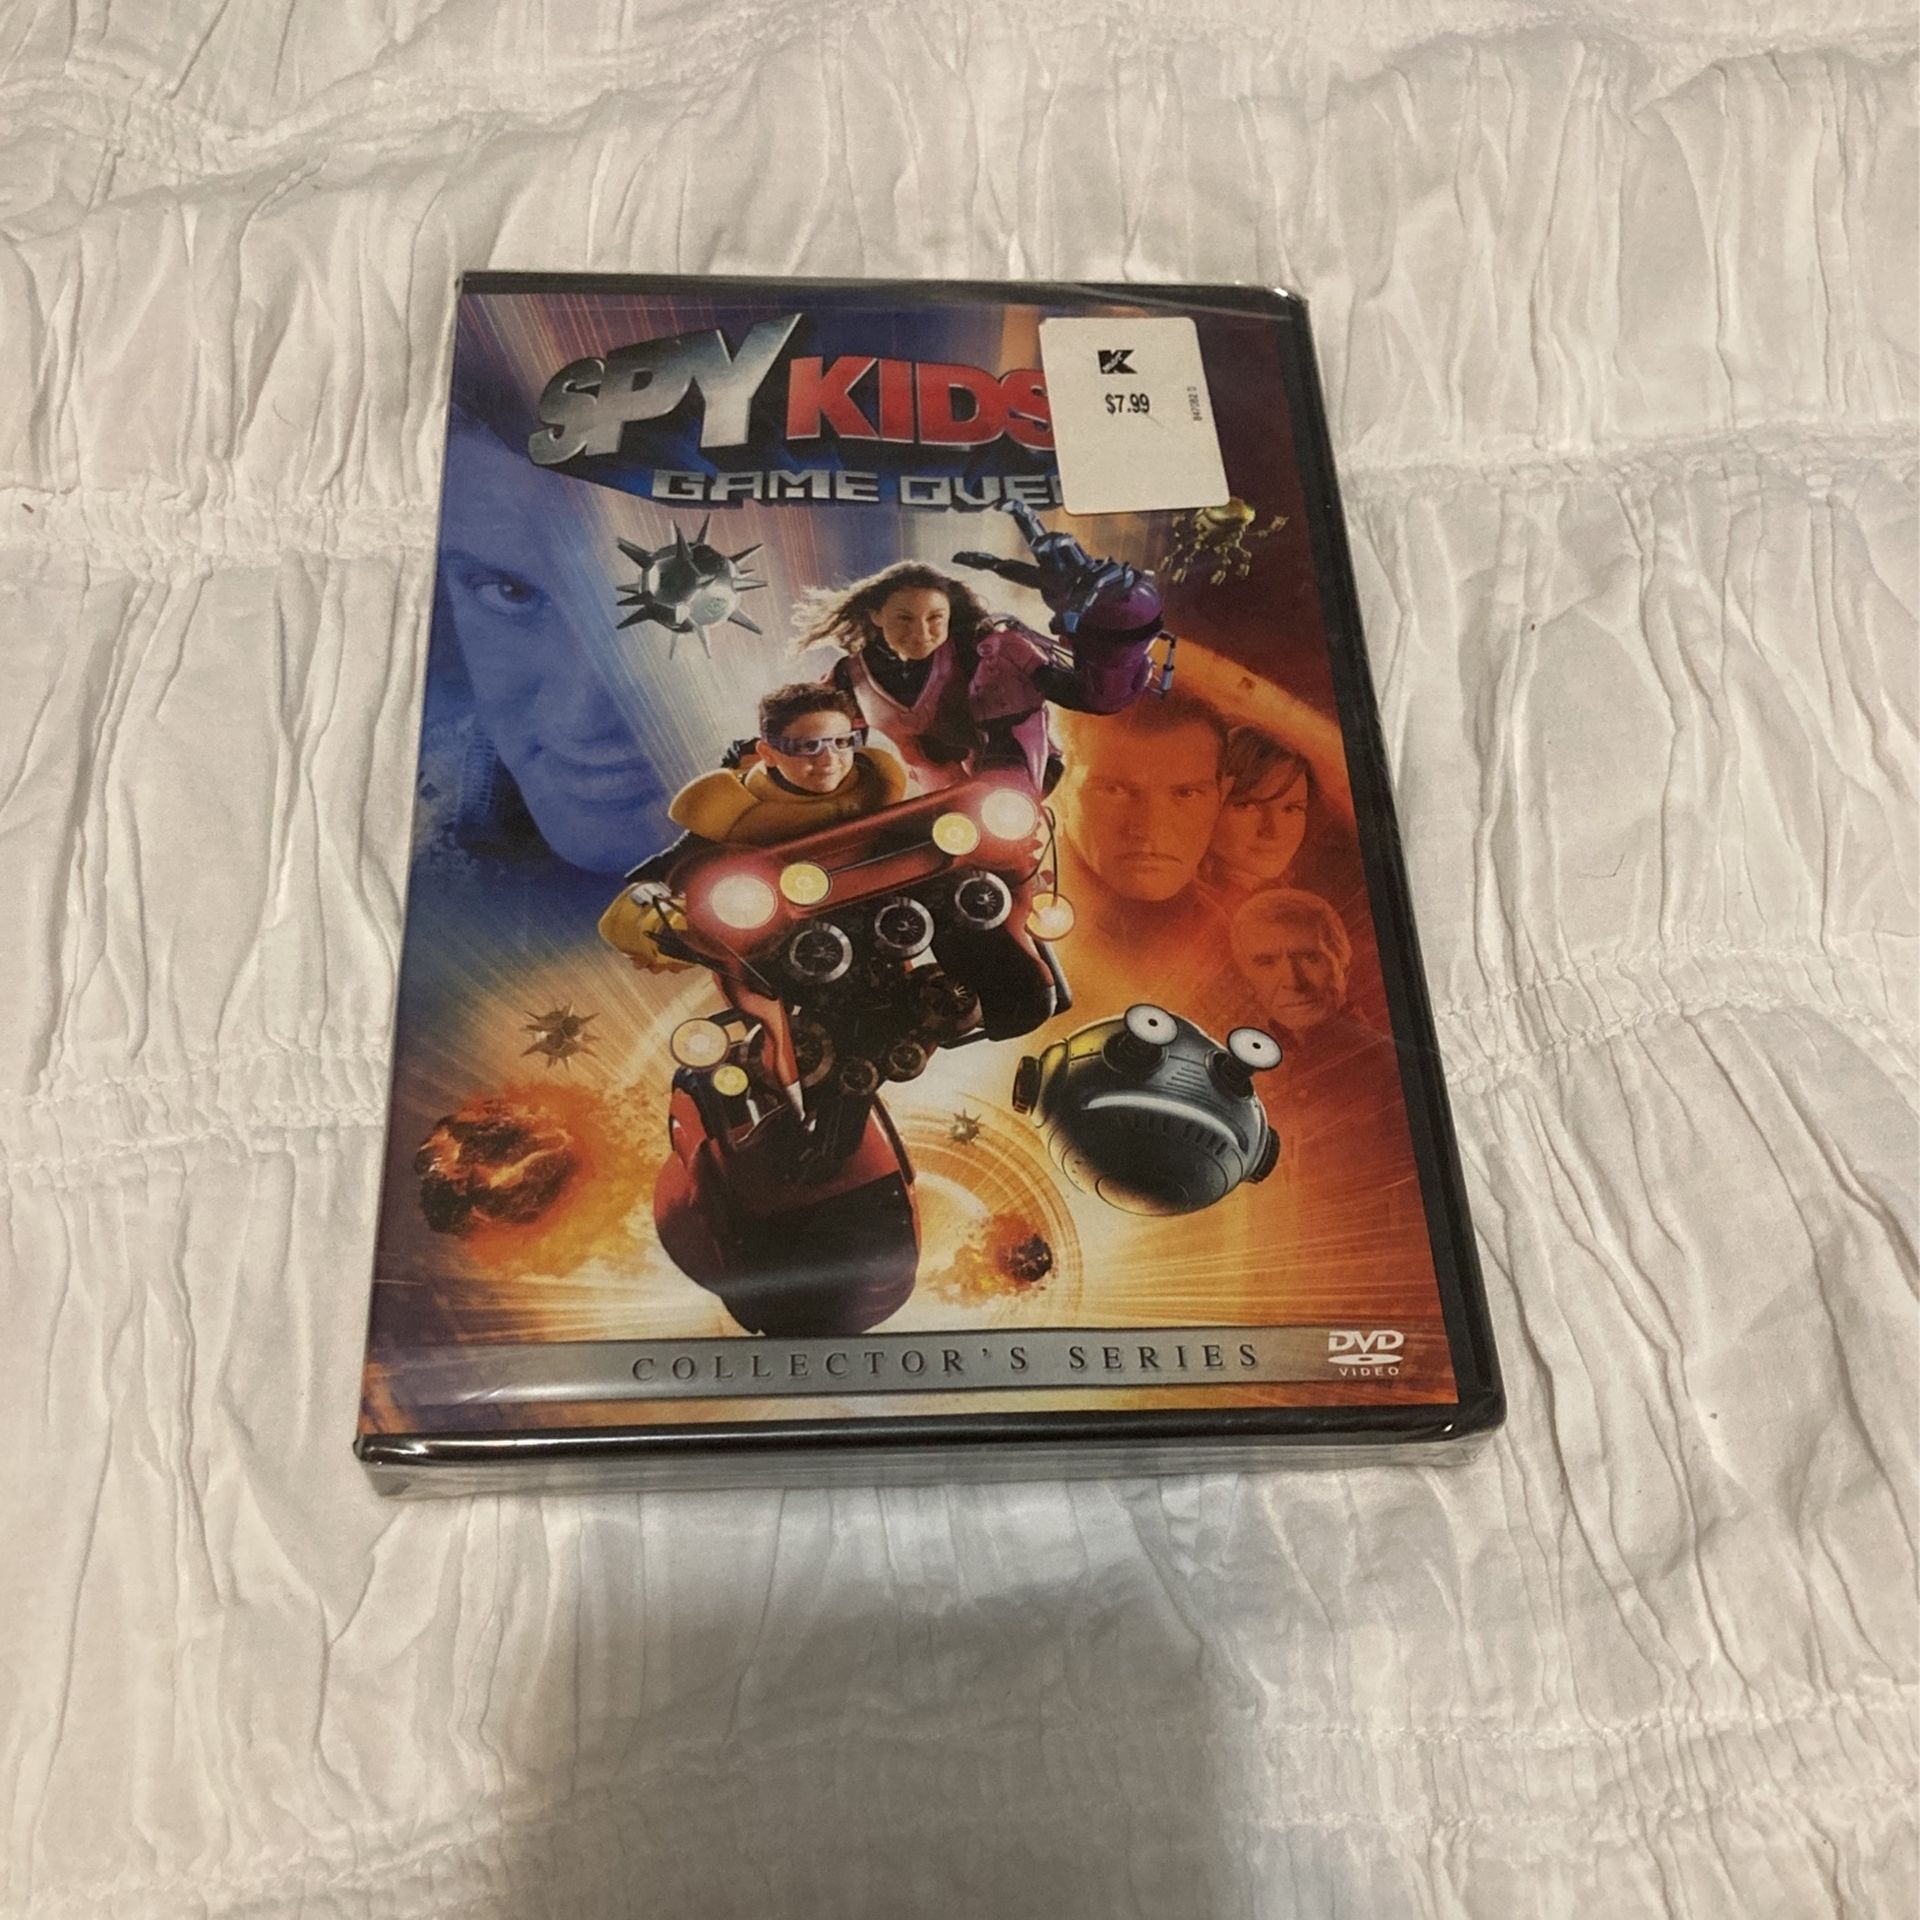 Spy Kids Game Over SEALED (Collector’s Series)